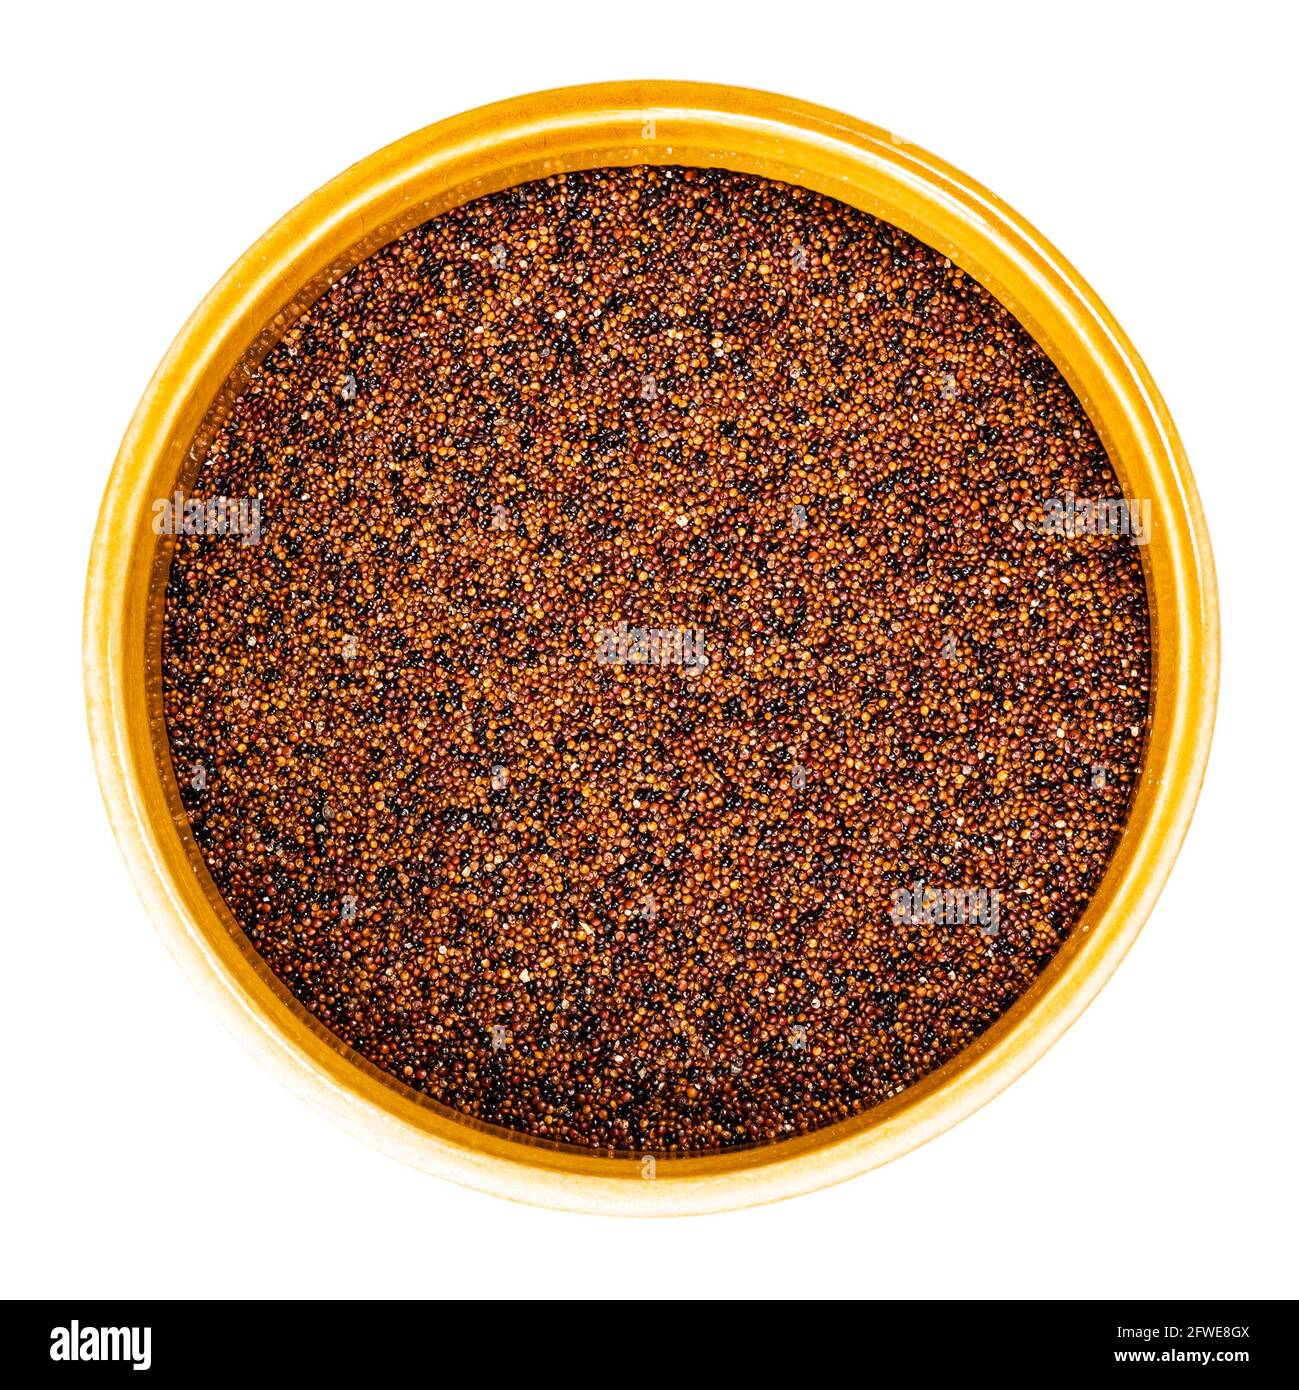 top view of canihua seeds in round ceramic bowl cutout on white background Stock Photo